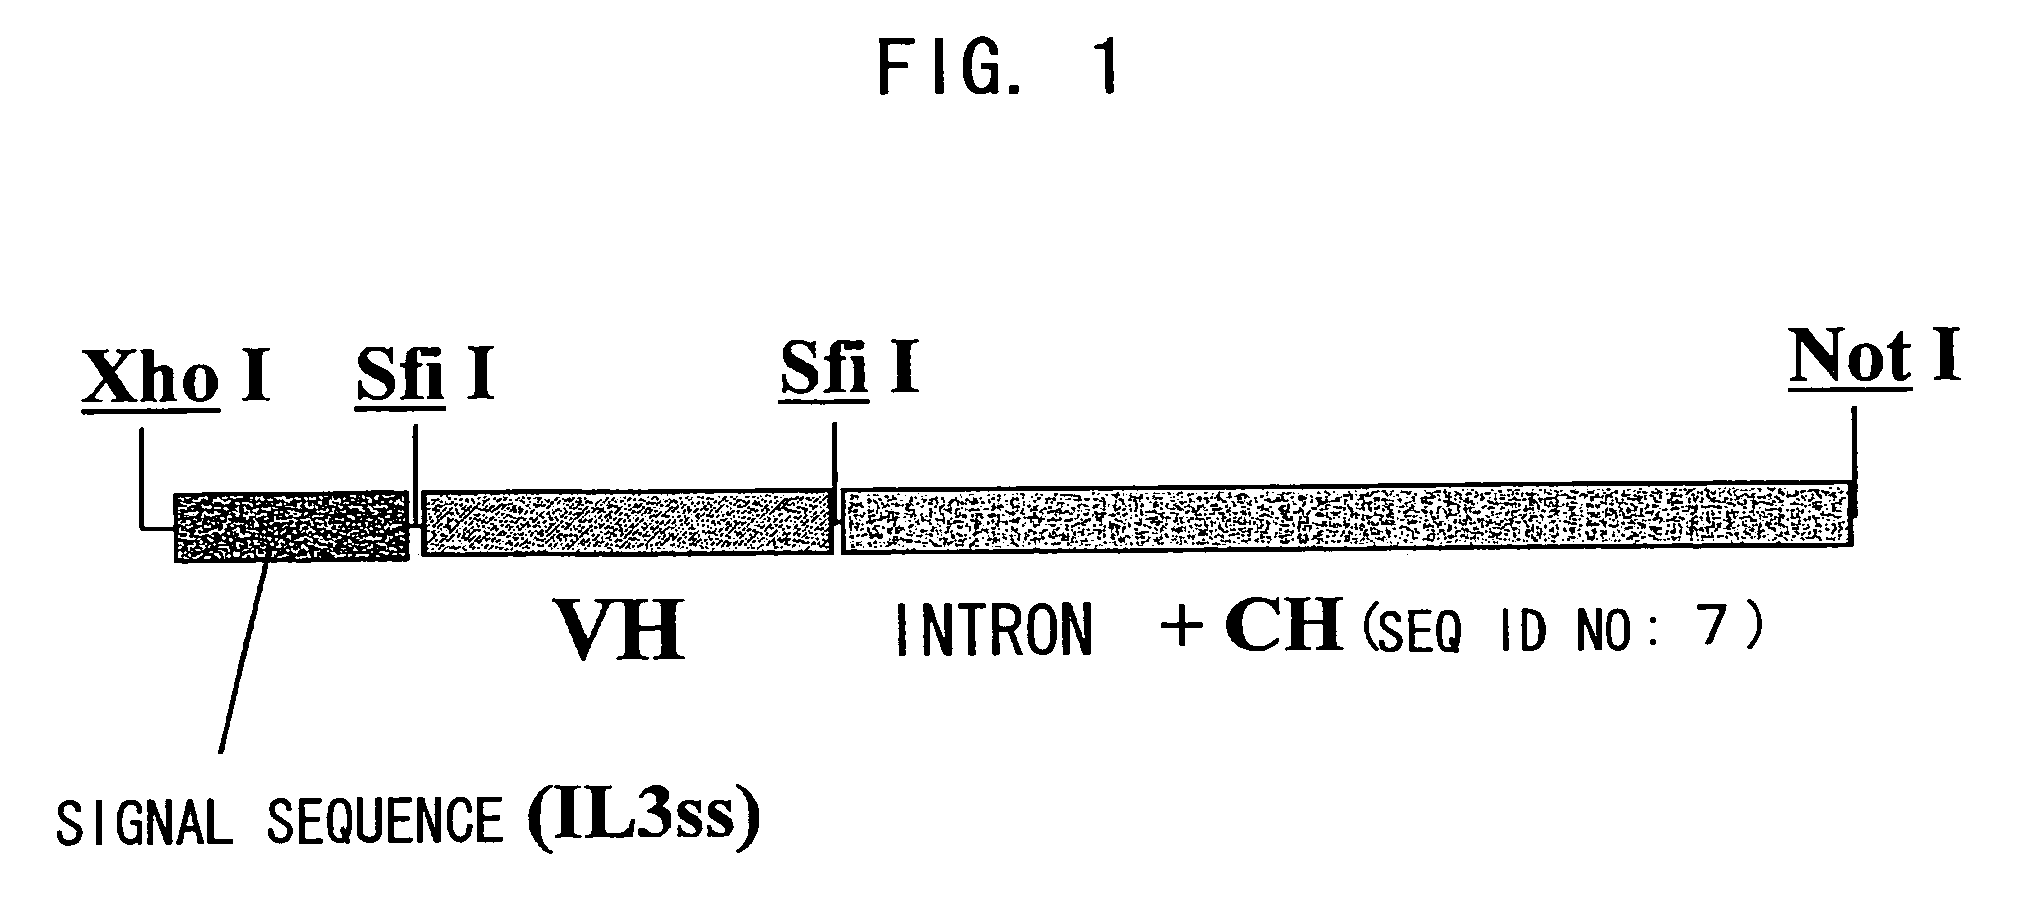 Bispecific antibody substituting for functional proteins